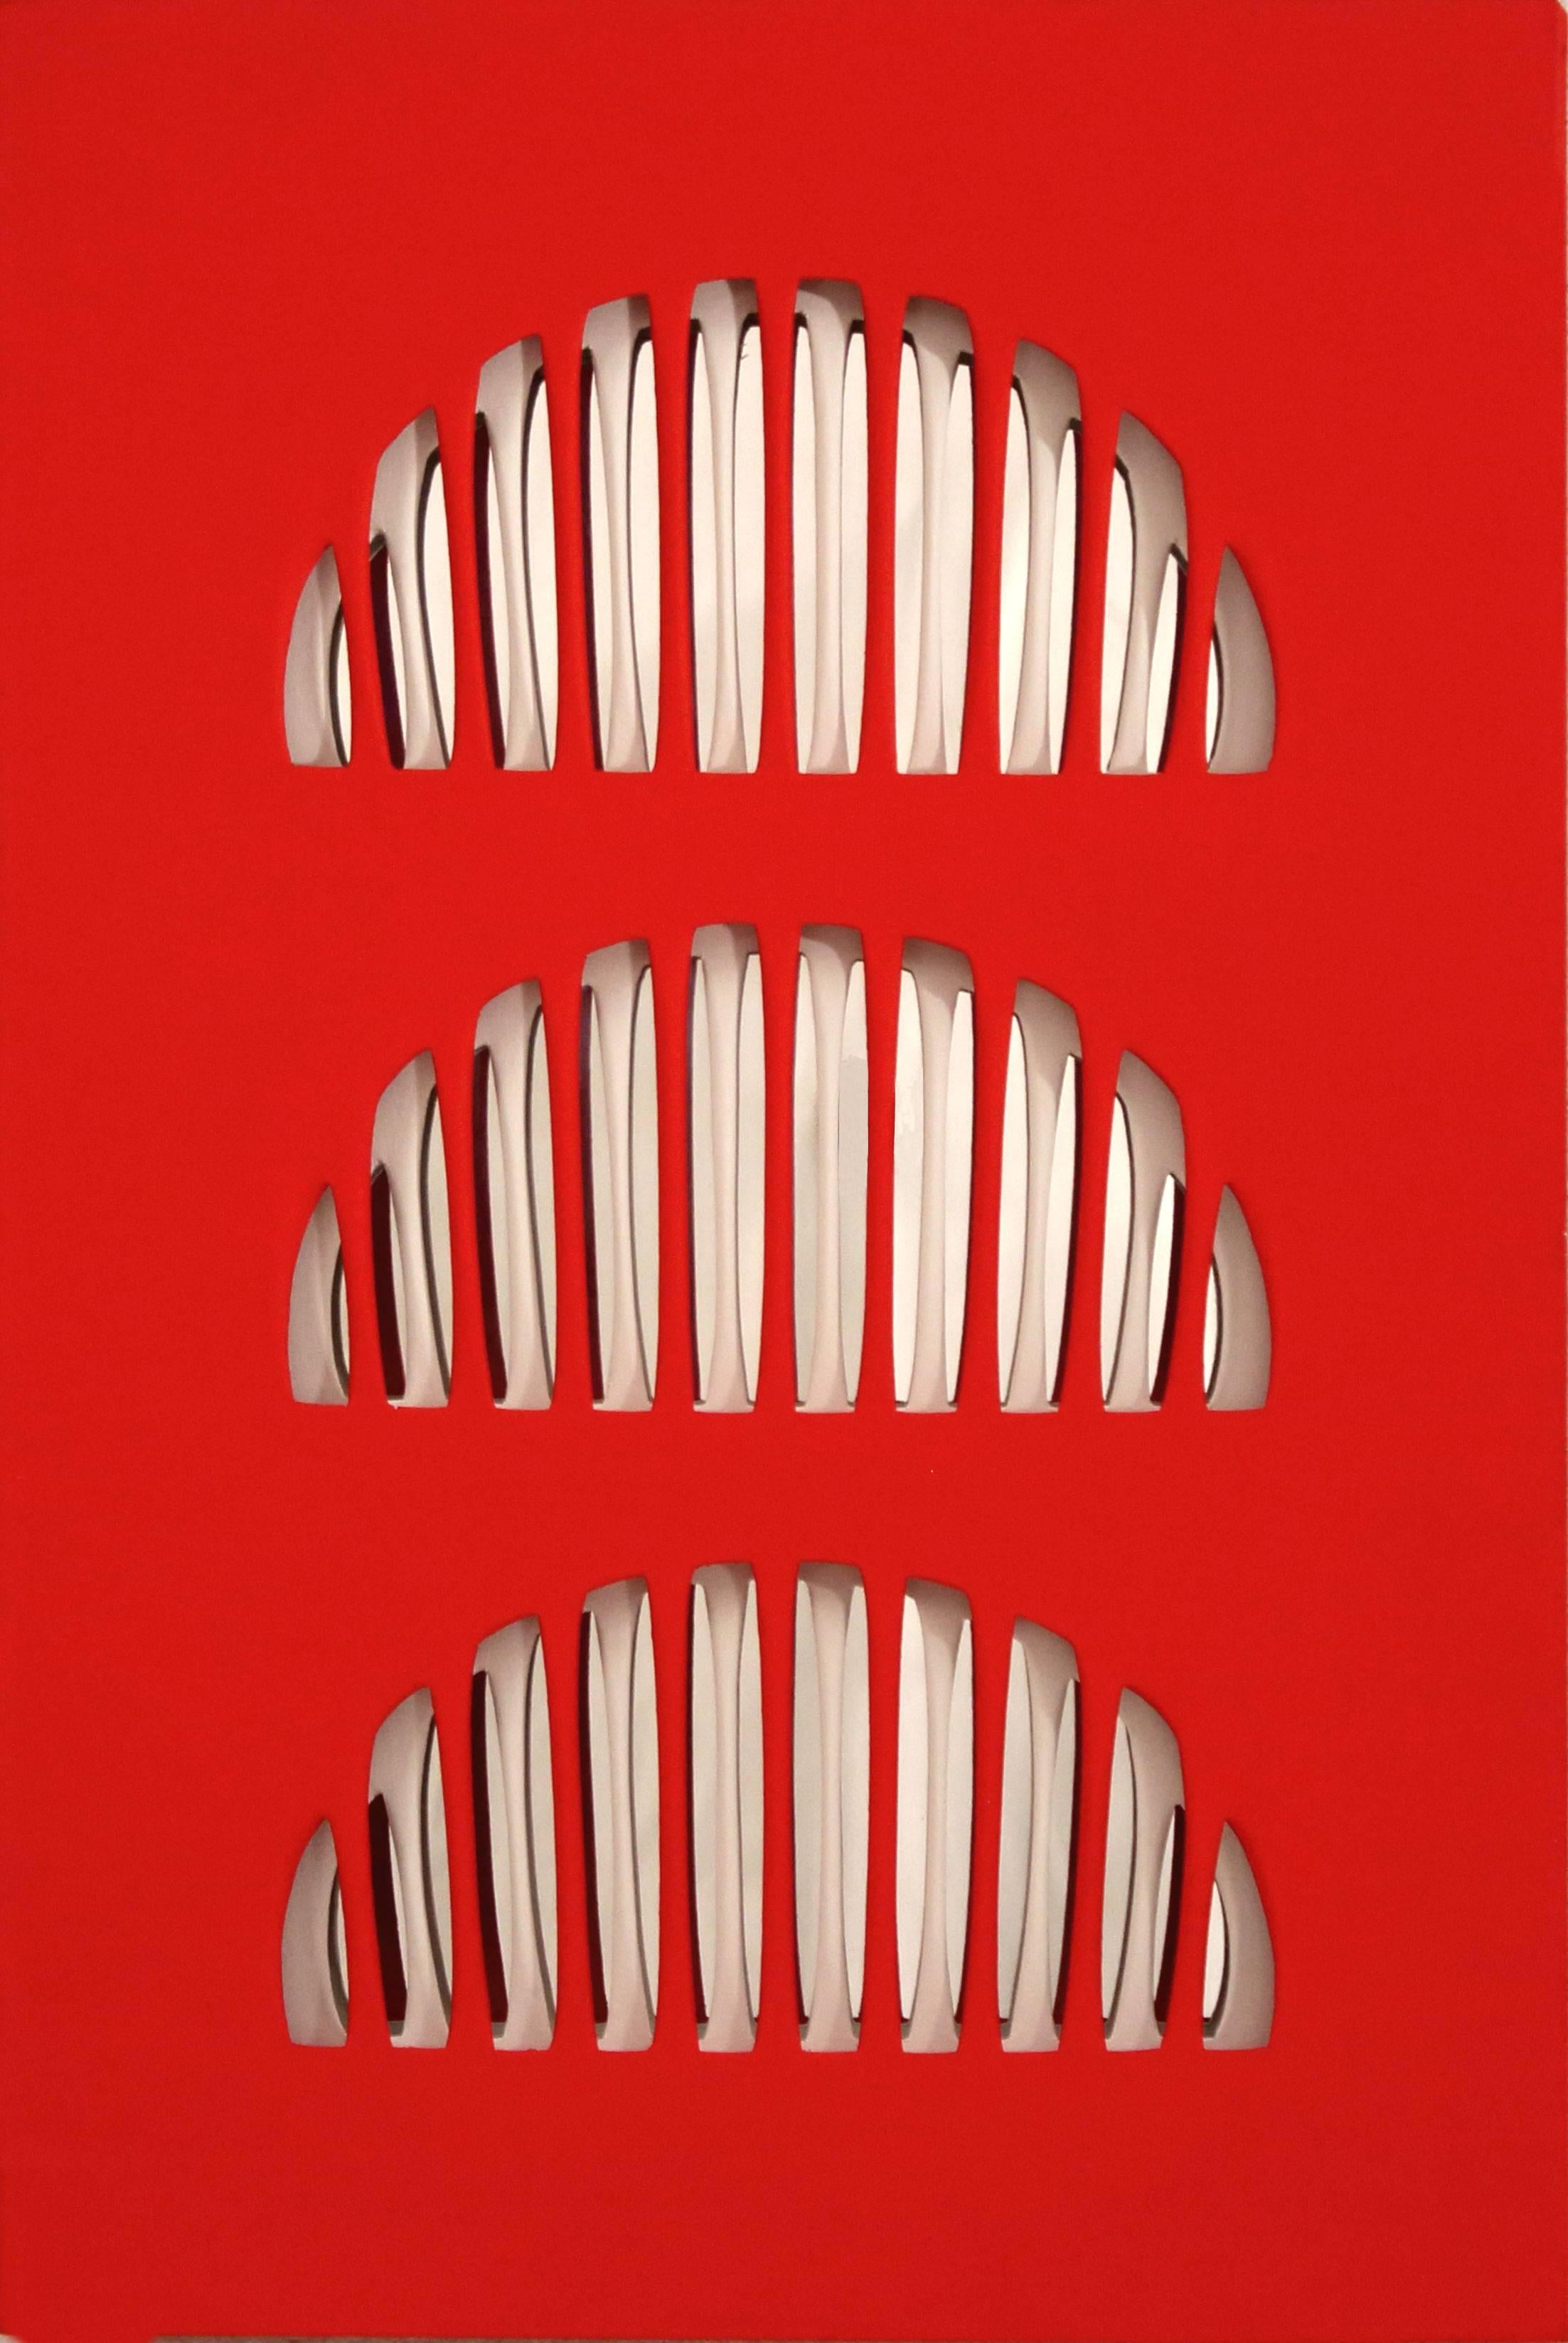 Vanna Nicolotti – Vivace

Carved and painted canvas and anodized metal, 2005

Dimensions: 70 cm x 47 cm
